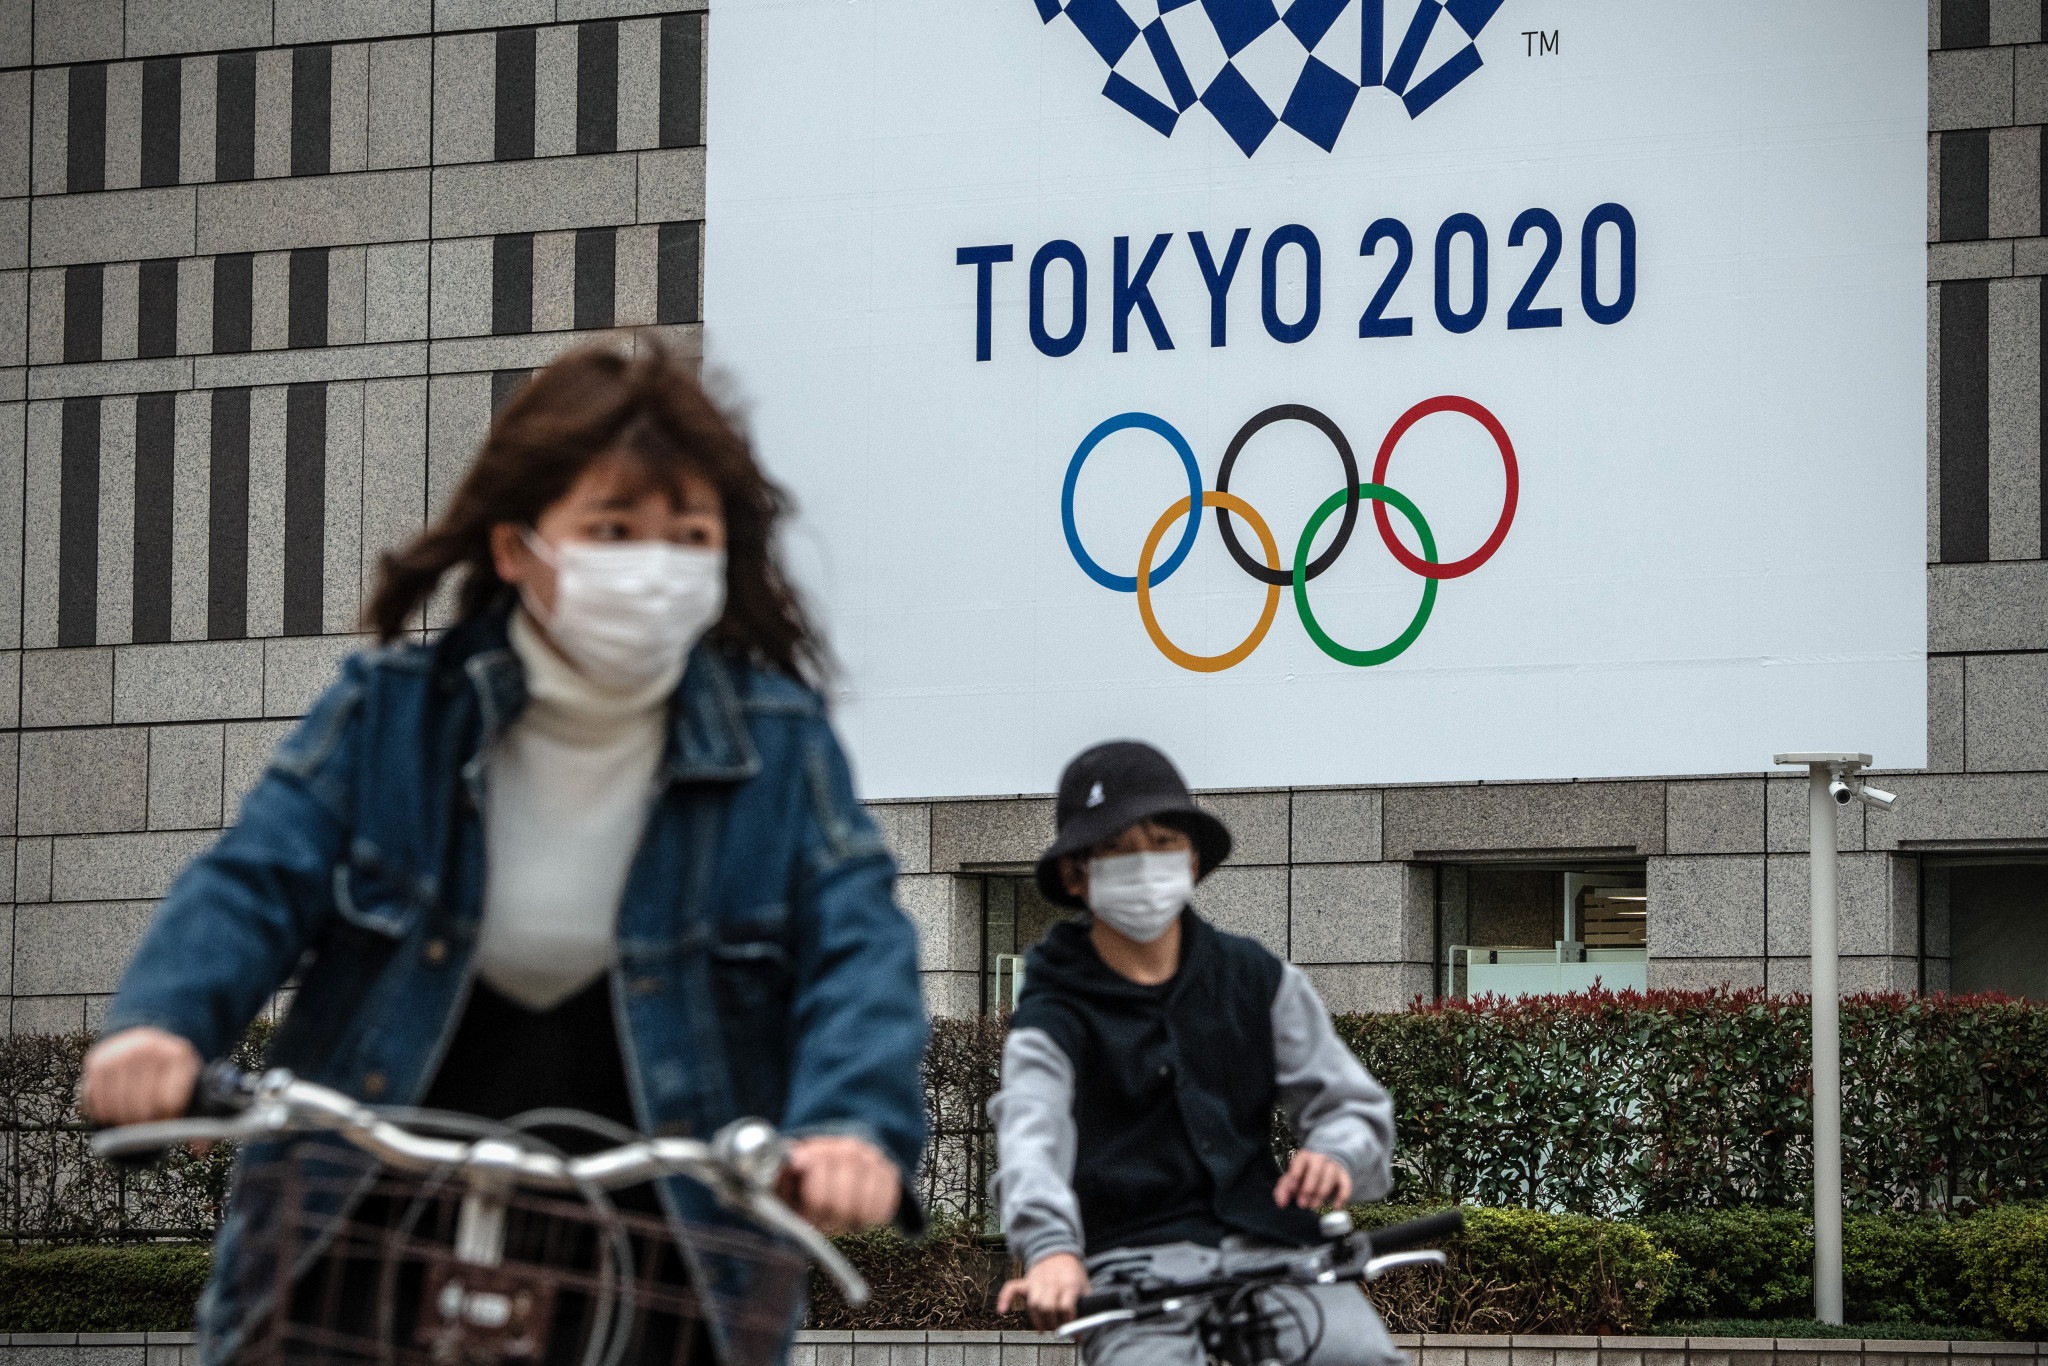 With Tokyo 2020 set to take place amid a global health crisis, it is more important than ever that all attending following the guidelines ©Getty Images